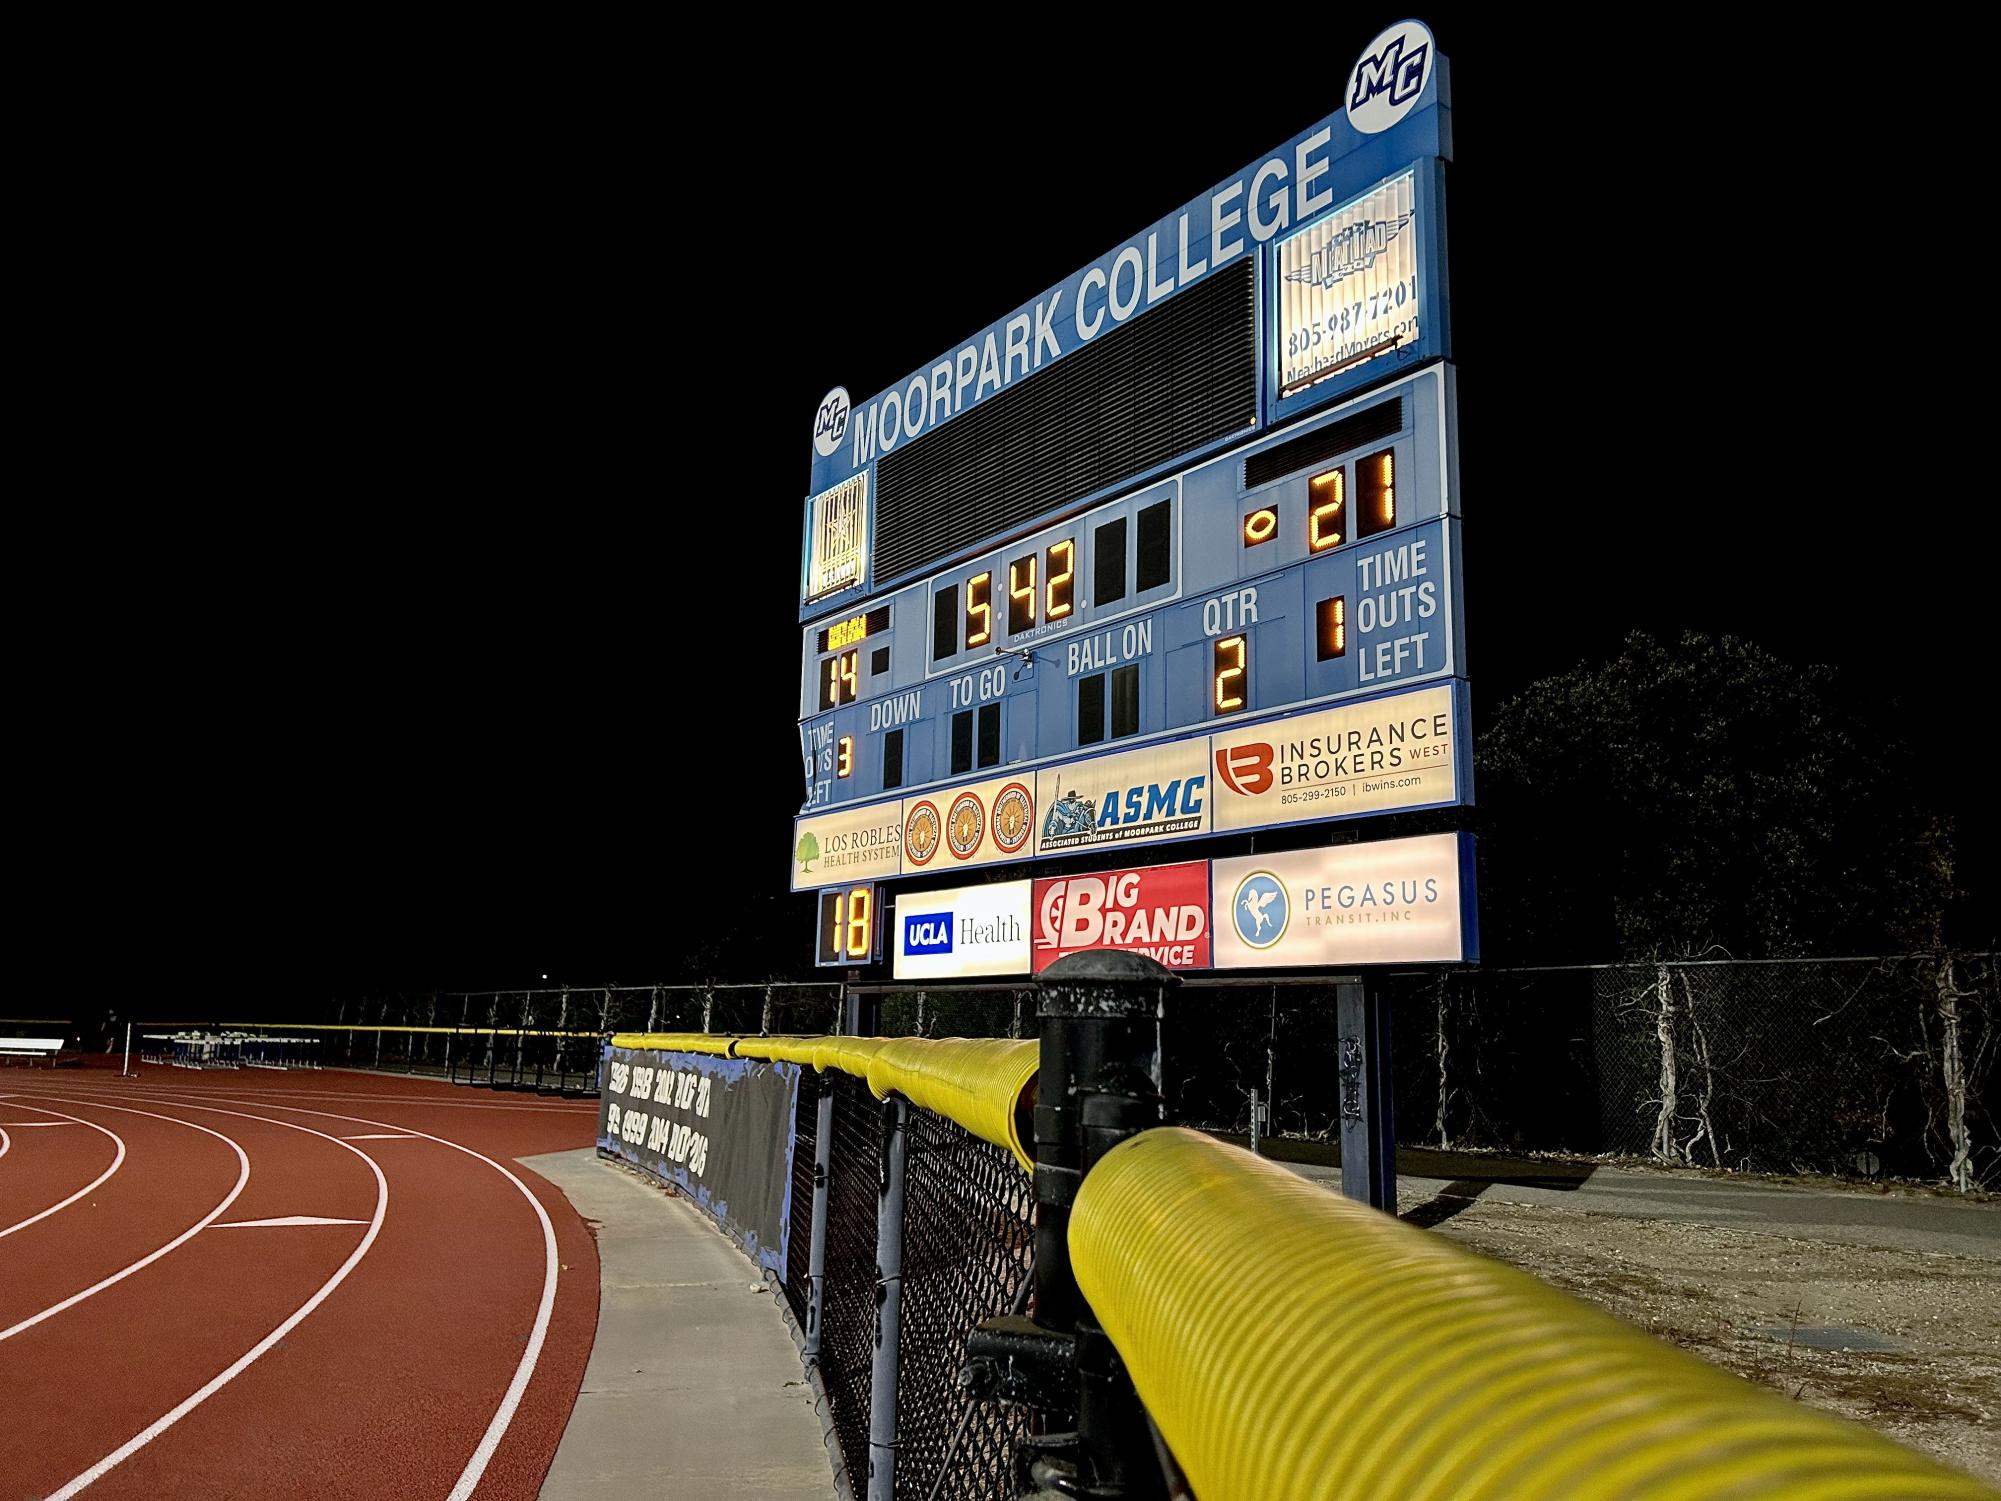 The scoreboard displays the numbers behind Saturday's contest, foreshadowing the eventual outcome. The Moorpark Raiders would lose to College of the Canyons 35-30 on Oct. 28, 2023.